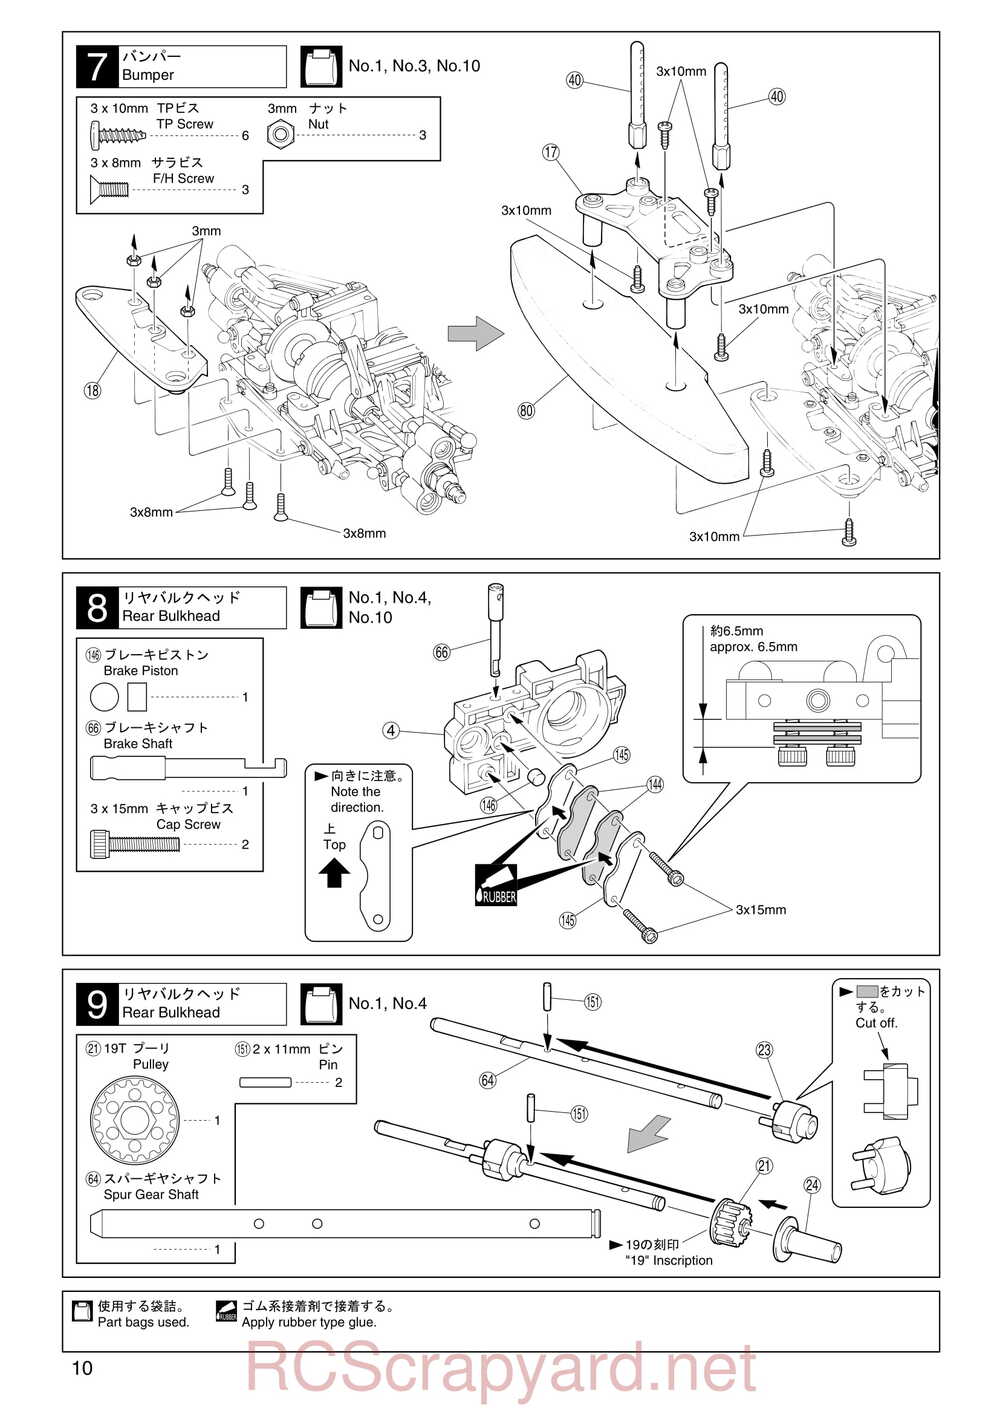 Kyosho - 31011 - V-One R - Manual - Page 10